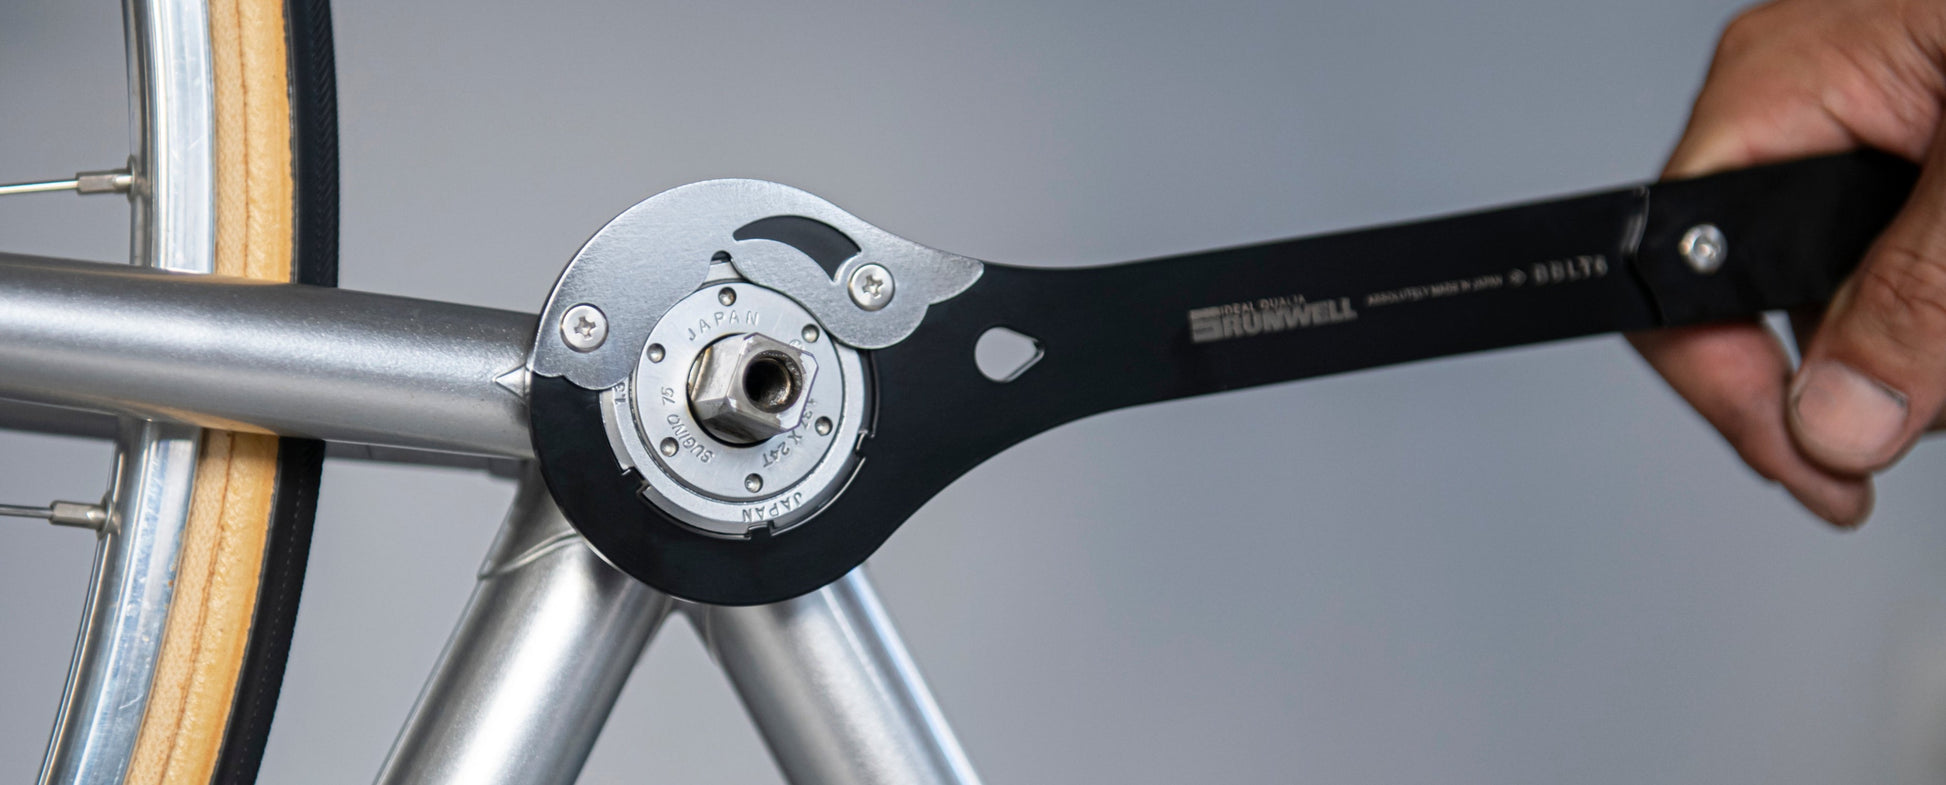 Boottom bracket tool by runwell, in action on a NJS bycicle's bottom bracket